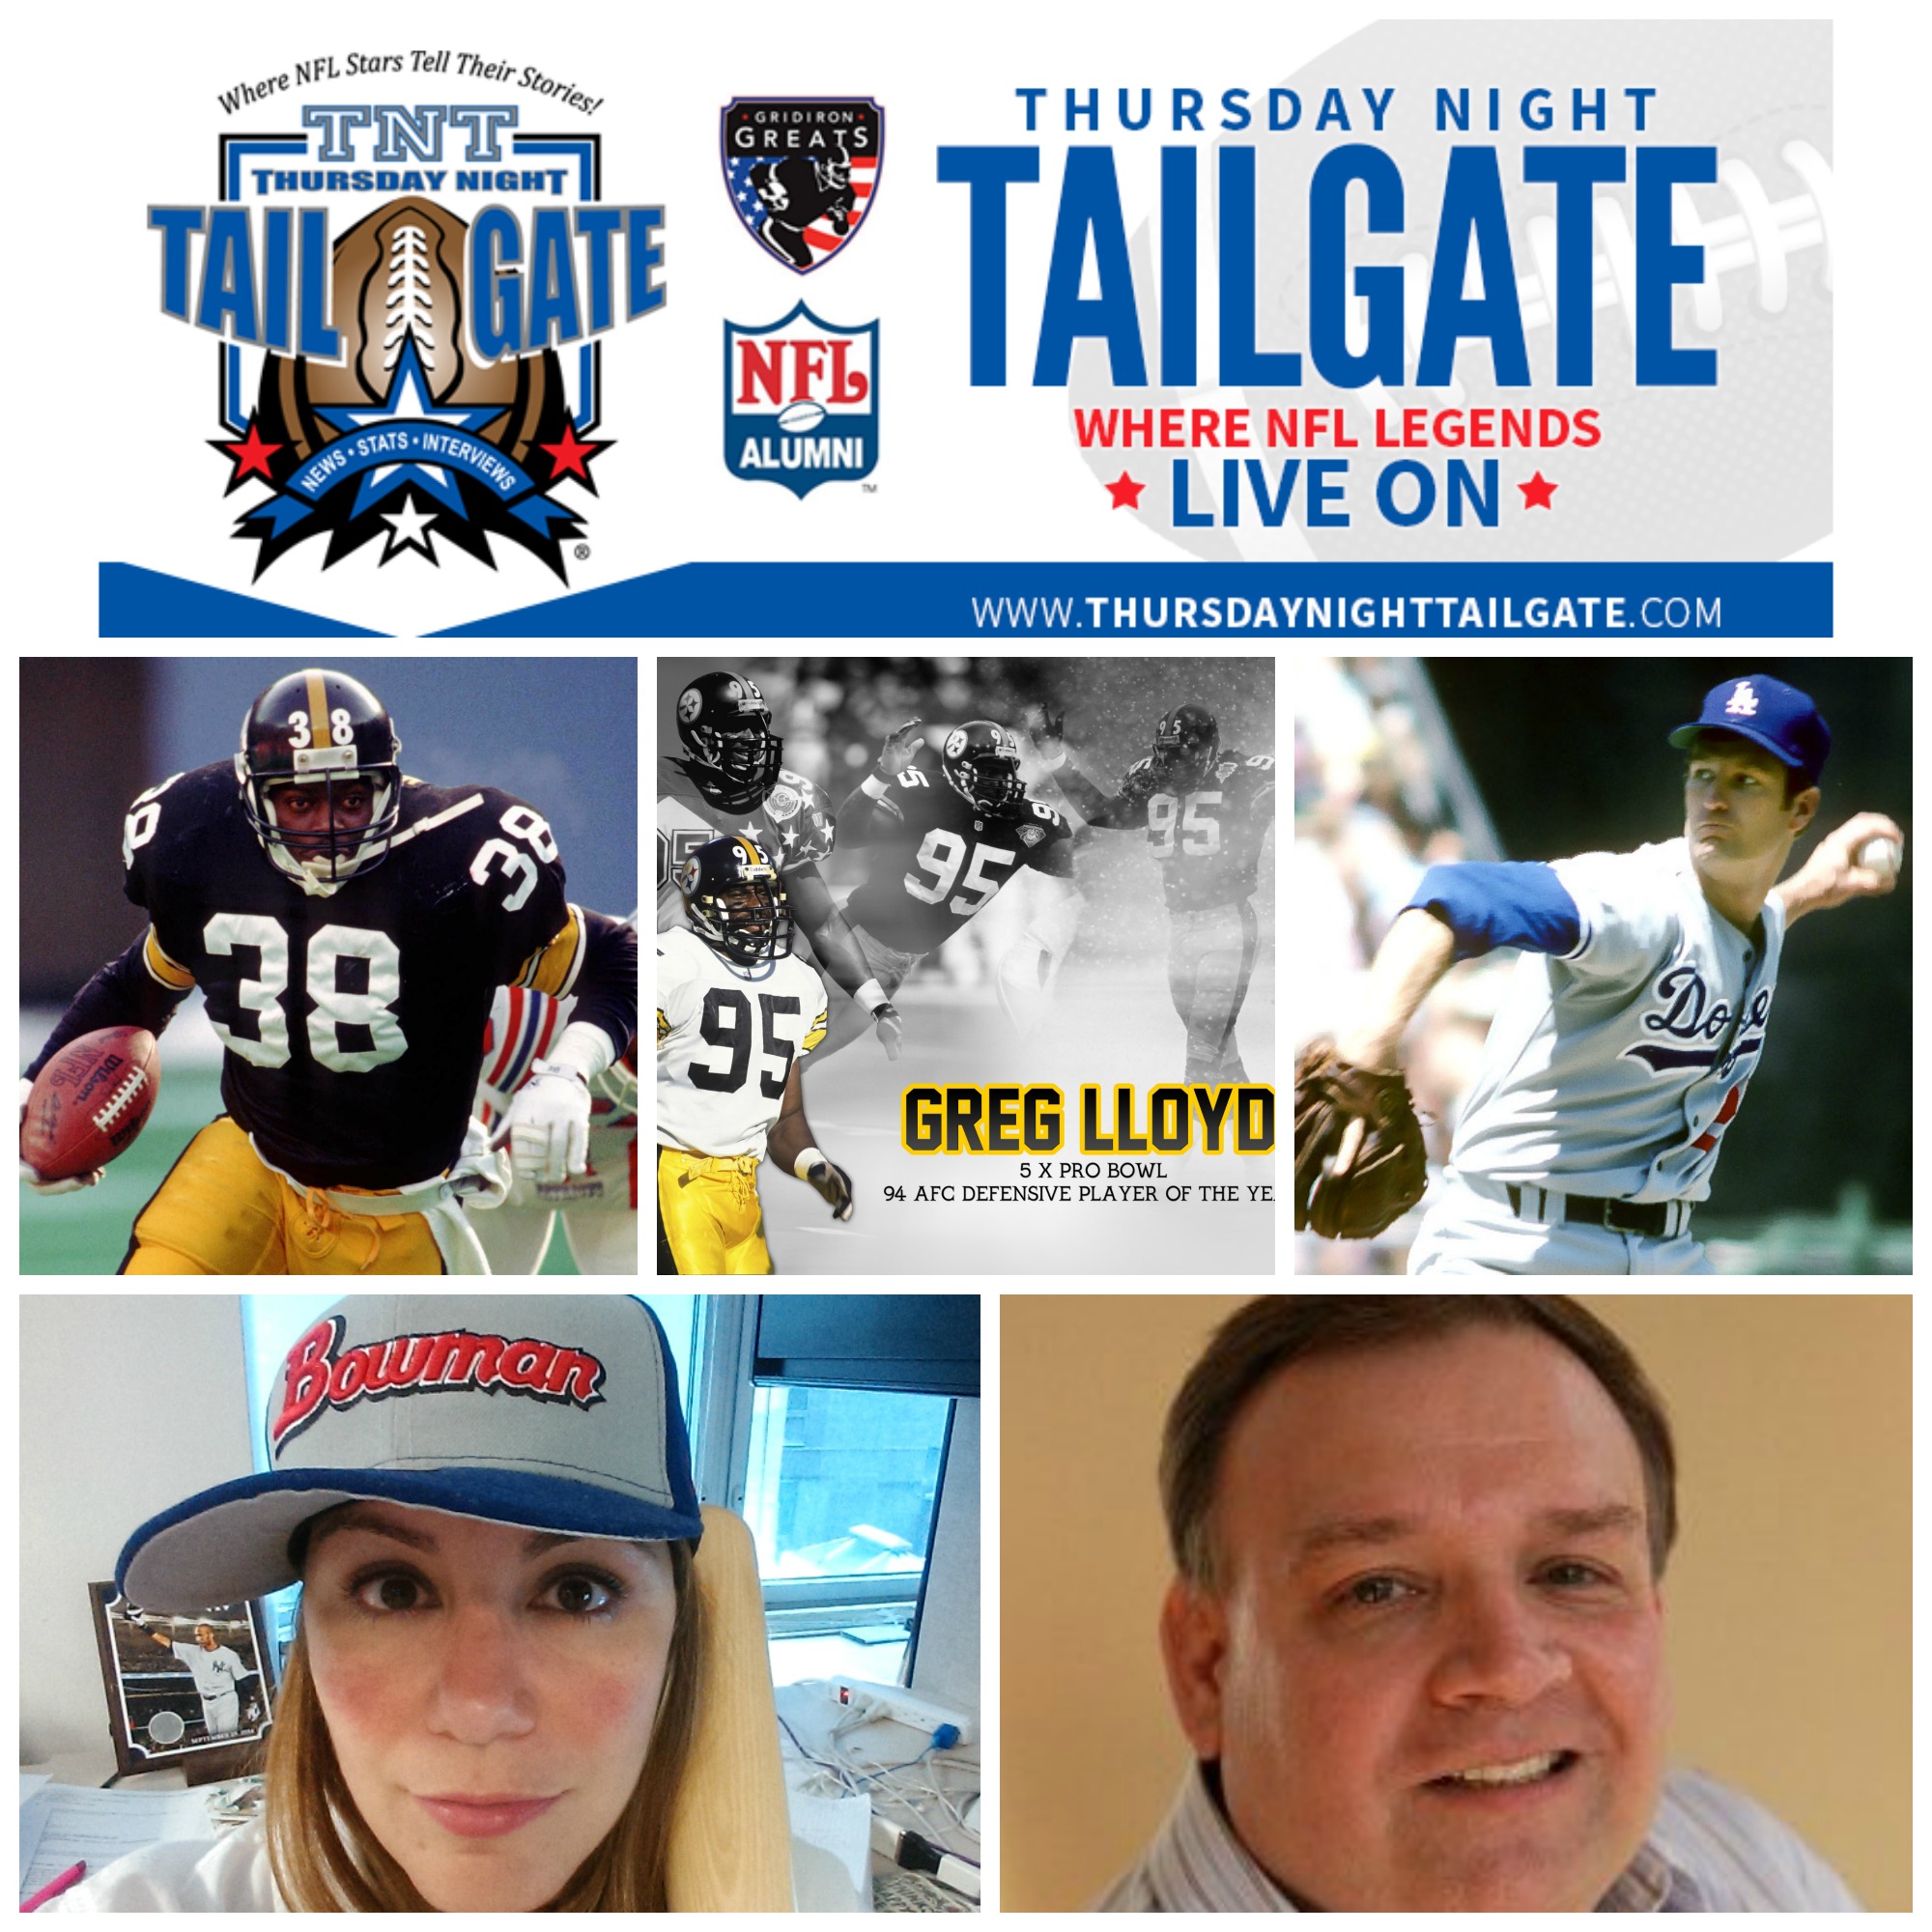 Talking NFL Draft with Tim Worley, Greg Lloyd & Russell Baxter Plus Dodgers & Yankees legend Tommy John & Topps Marketing Communications Manager Susan Lulgjuraj talk baseball and card collecting.